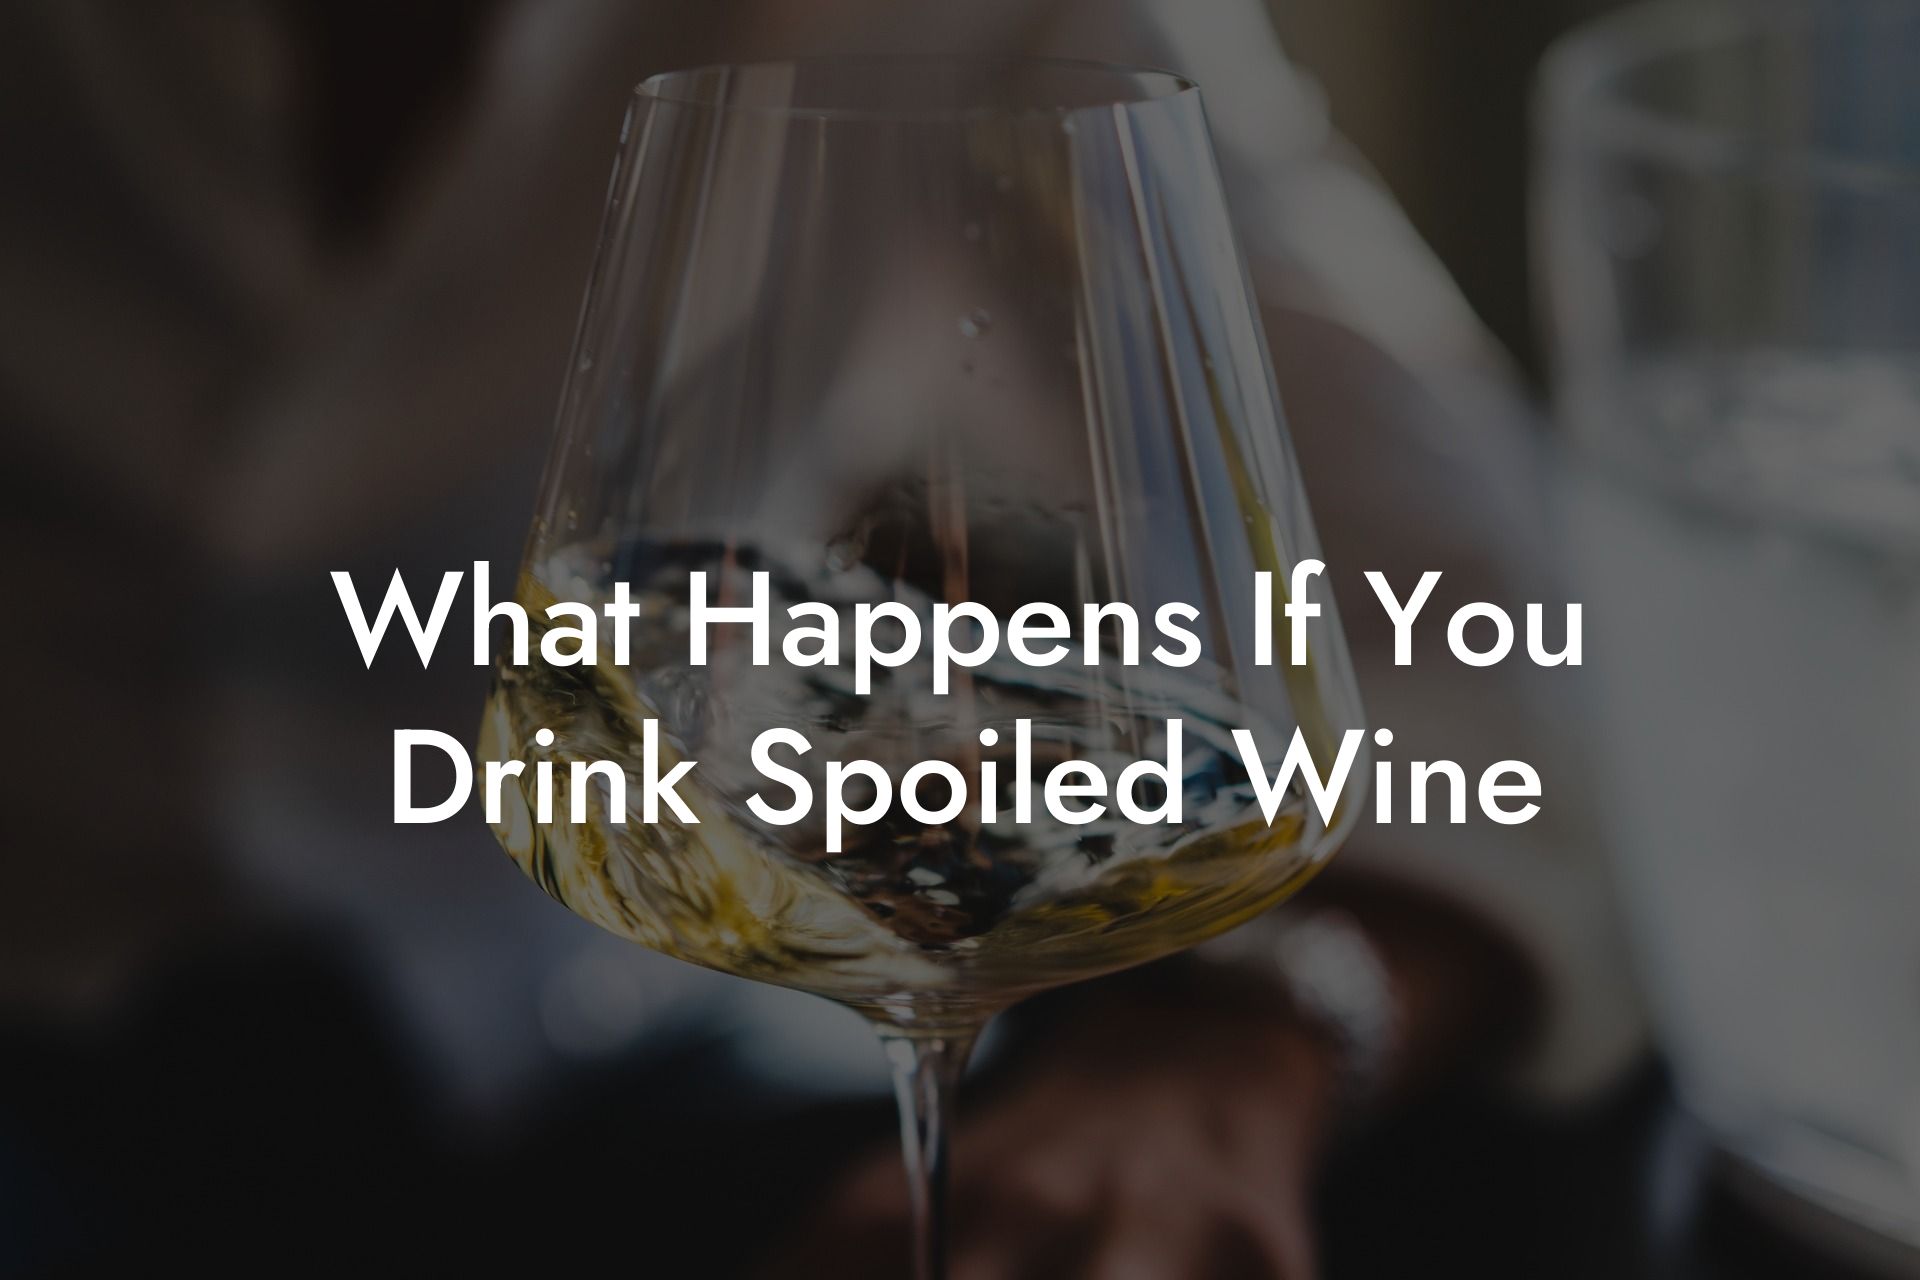 What Happens If You Drink Spoiled Wine